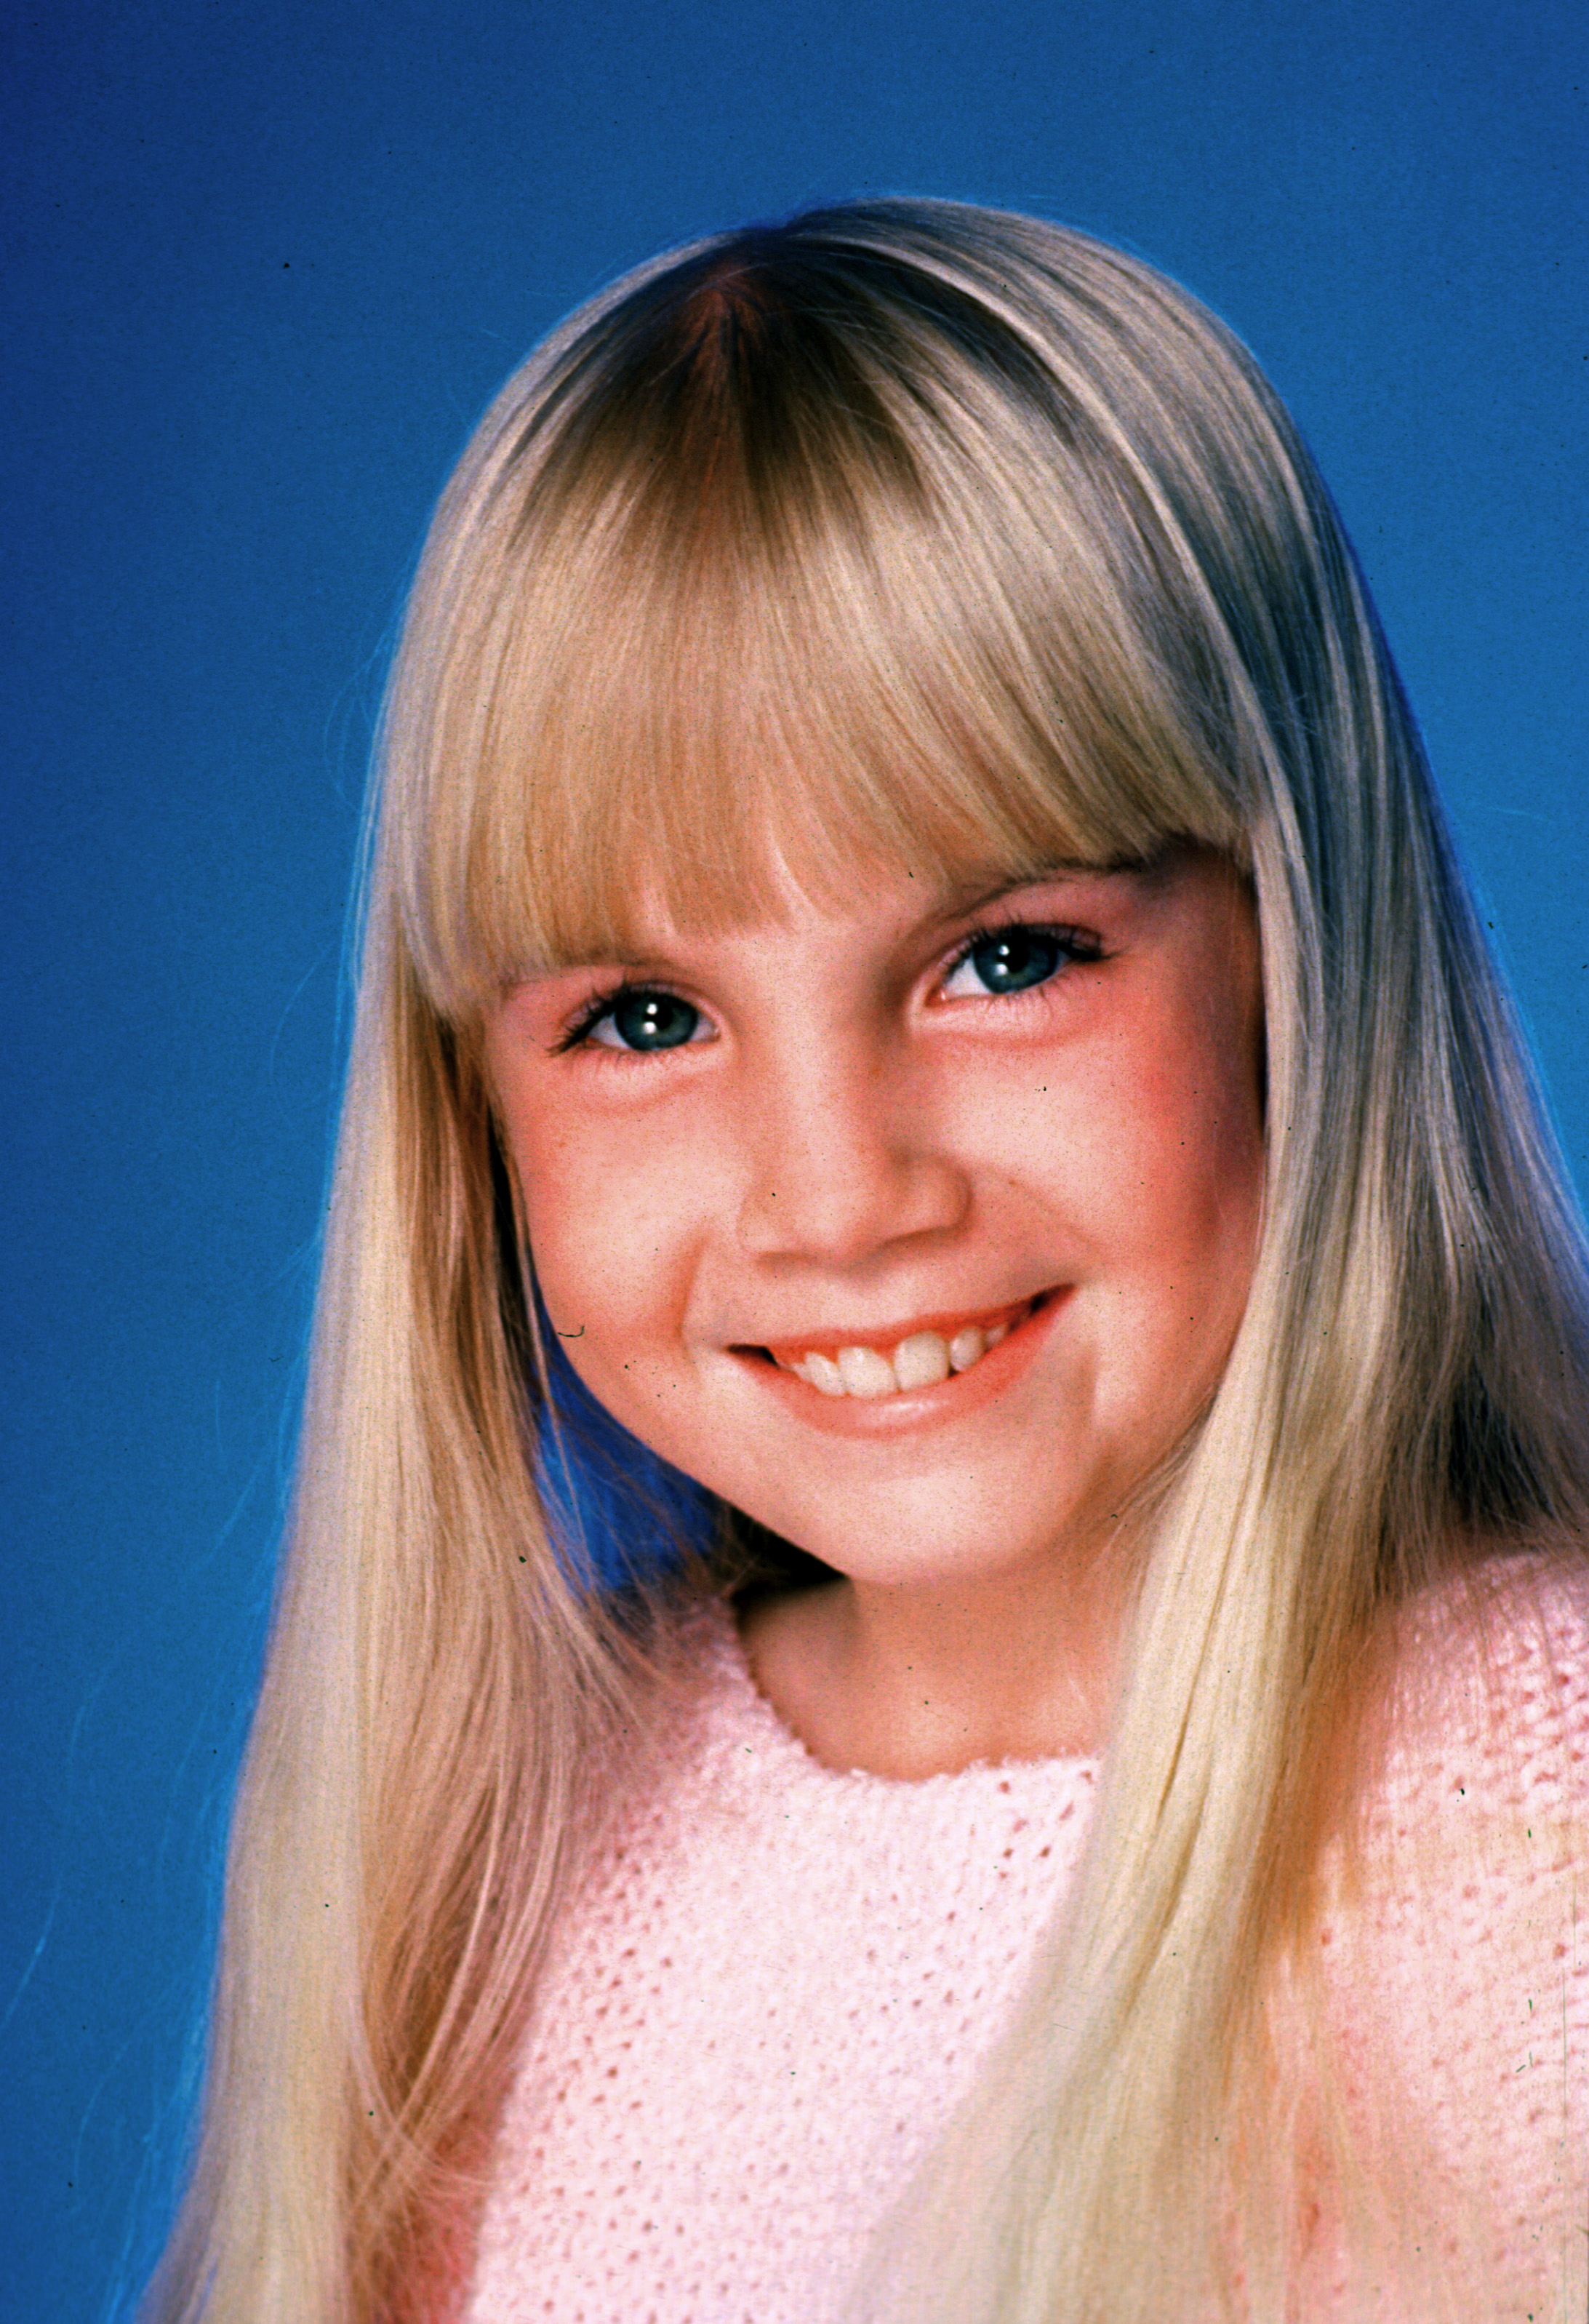 Heather O'Rourke le 3 mai 1986 | Source : Getty Images